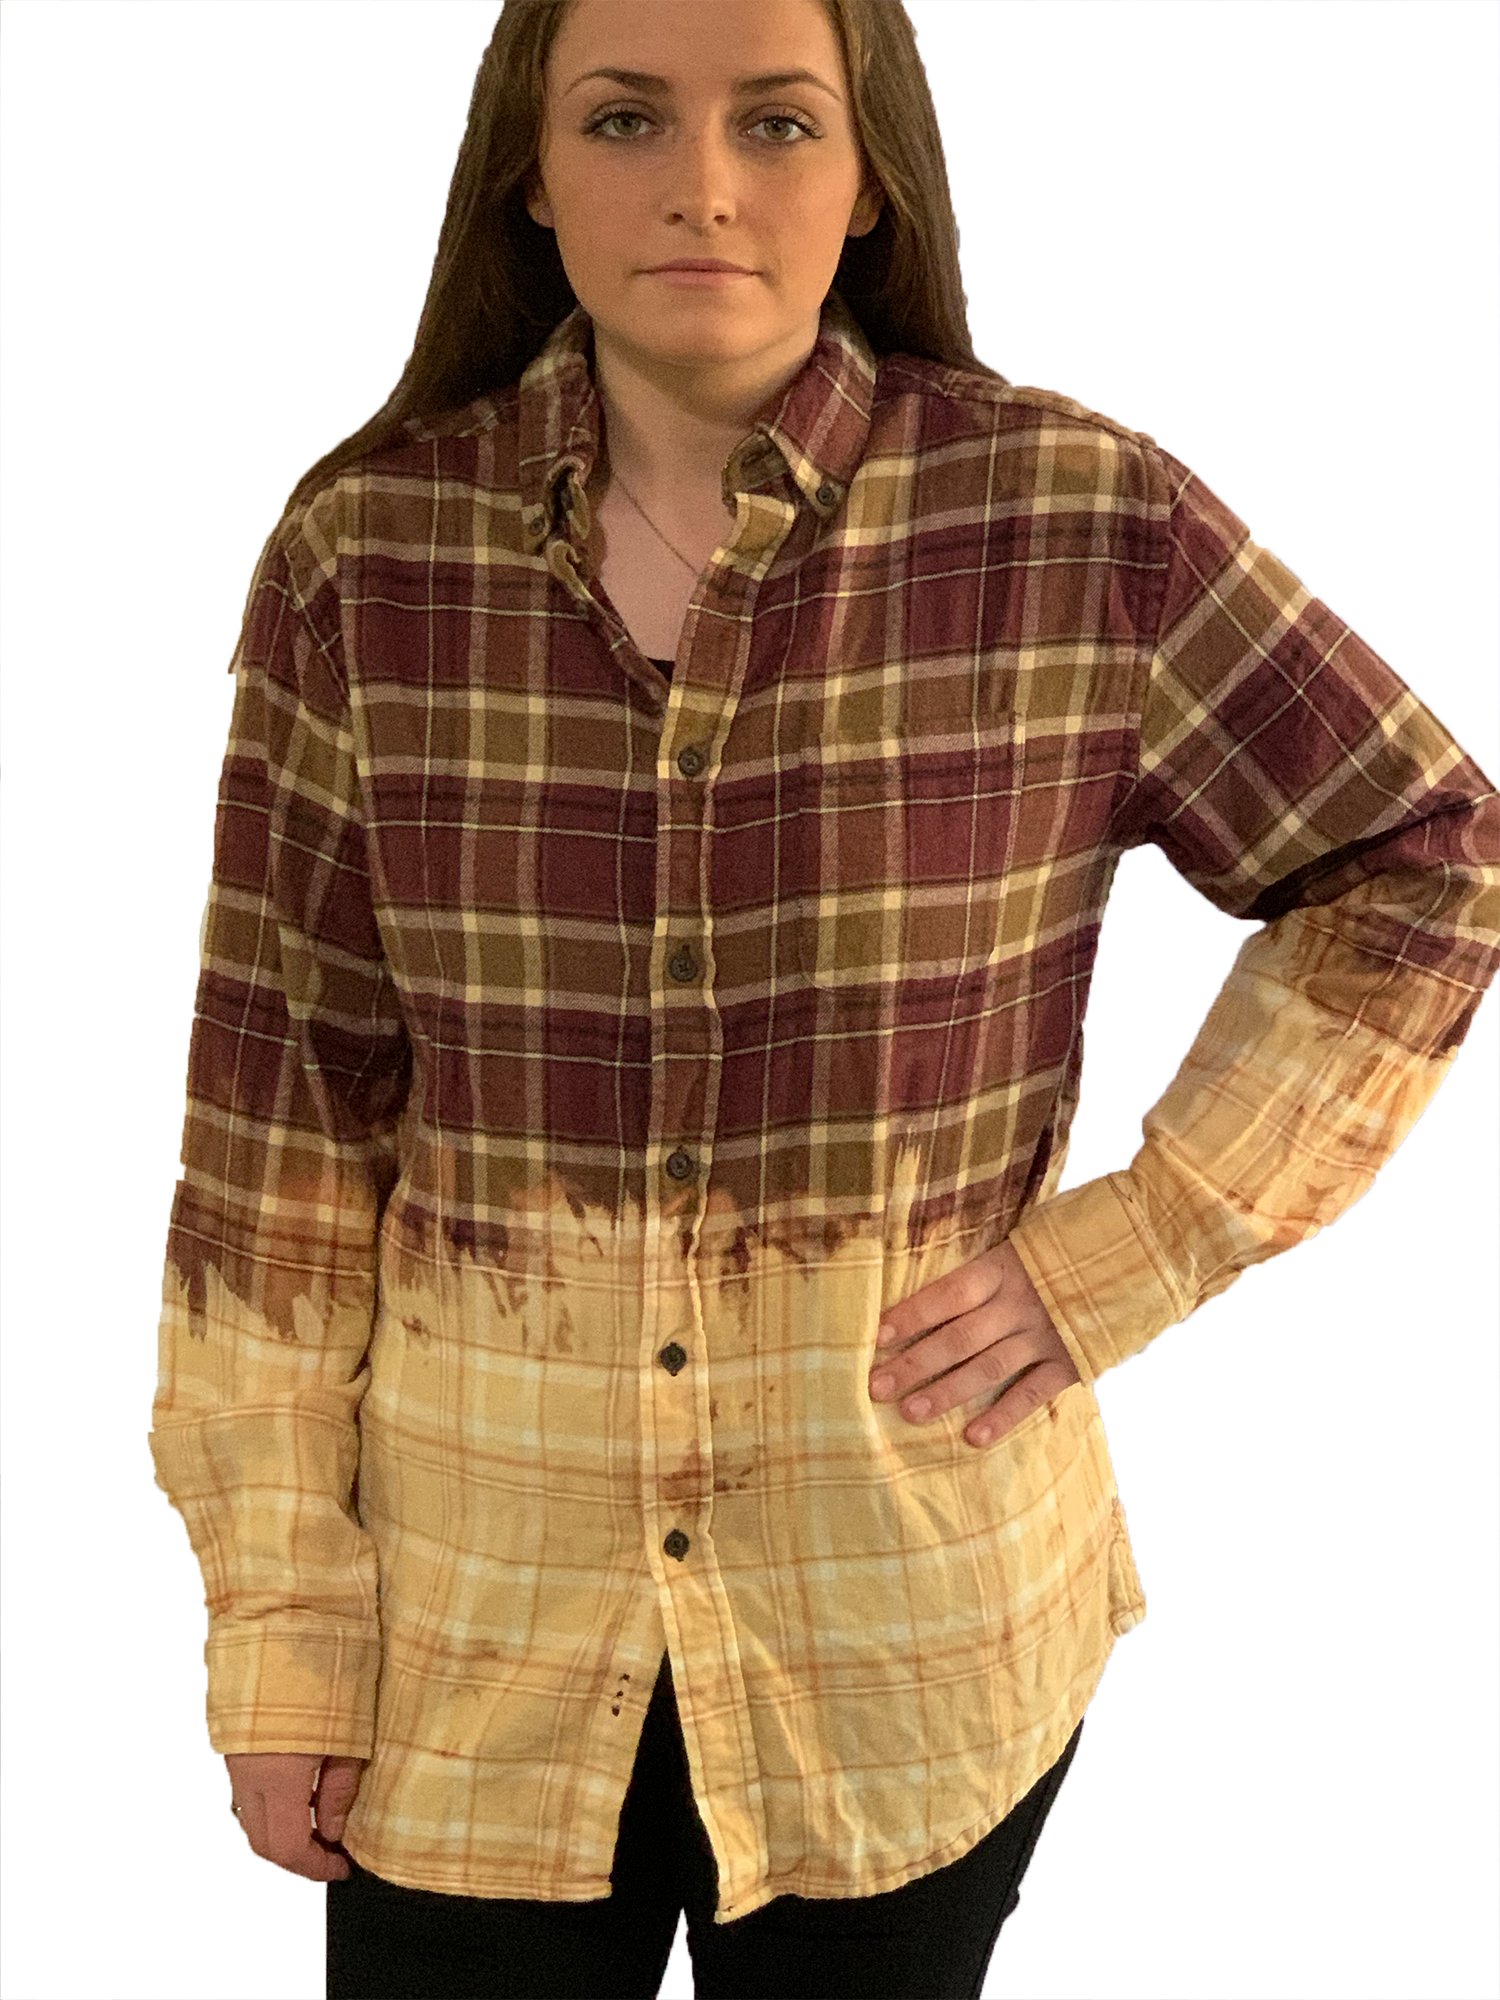 SIZE SMALL women/'s fit hand-bleached plaid shirt